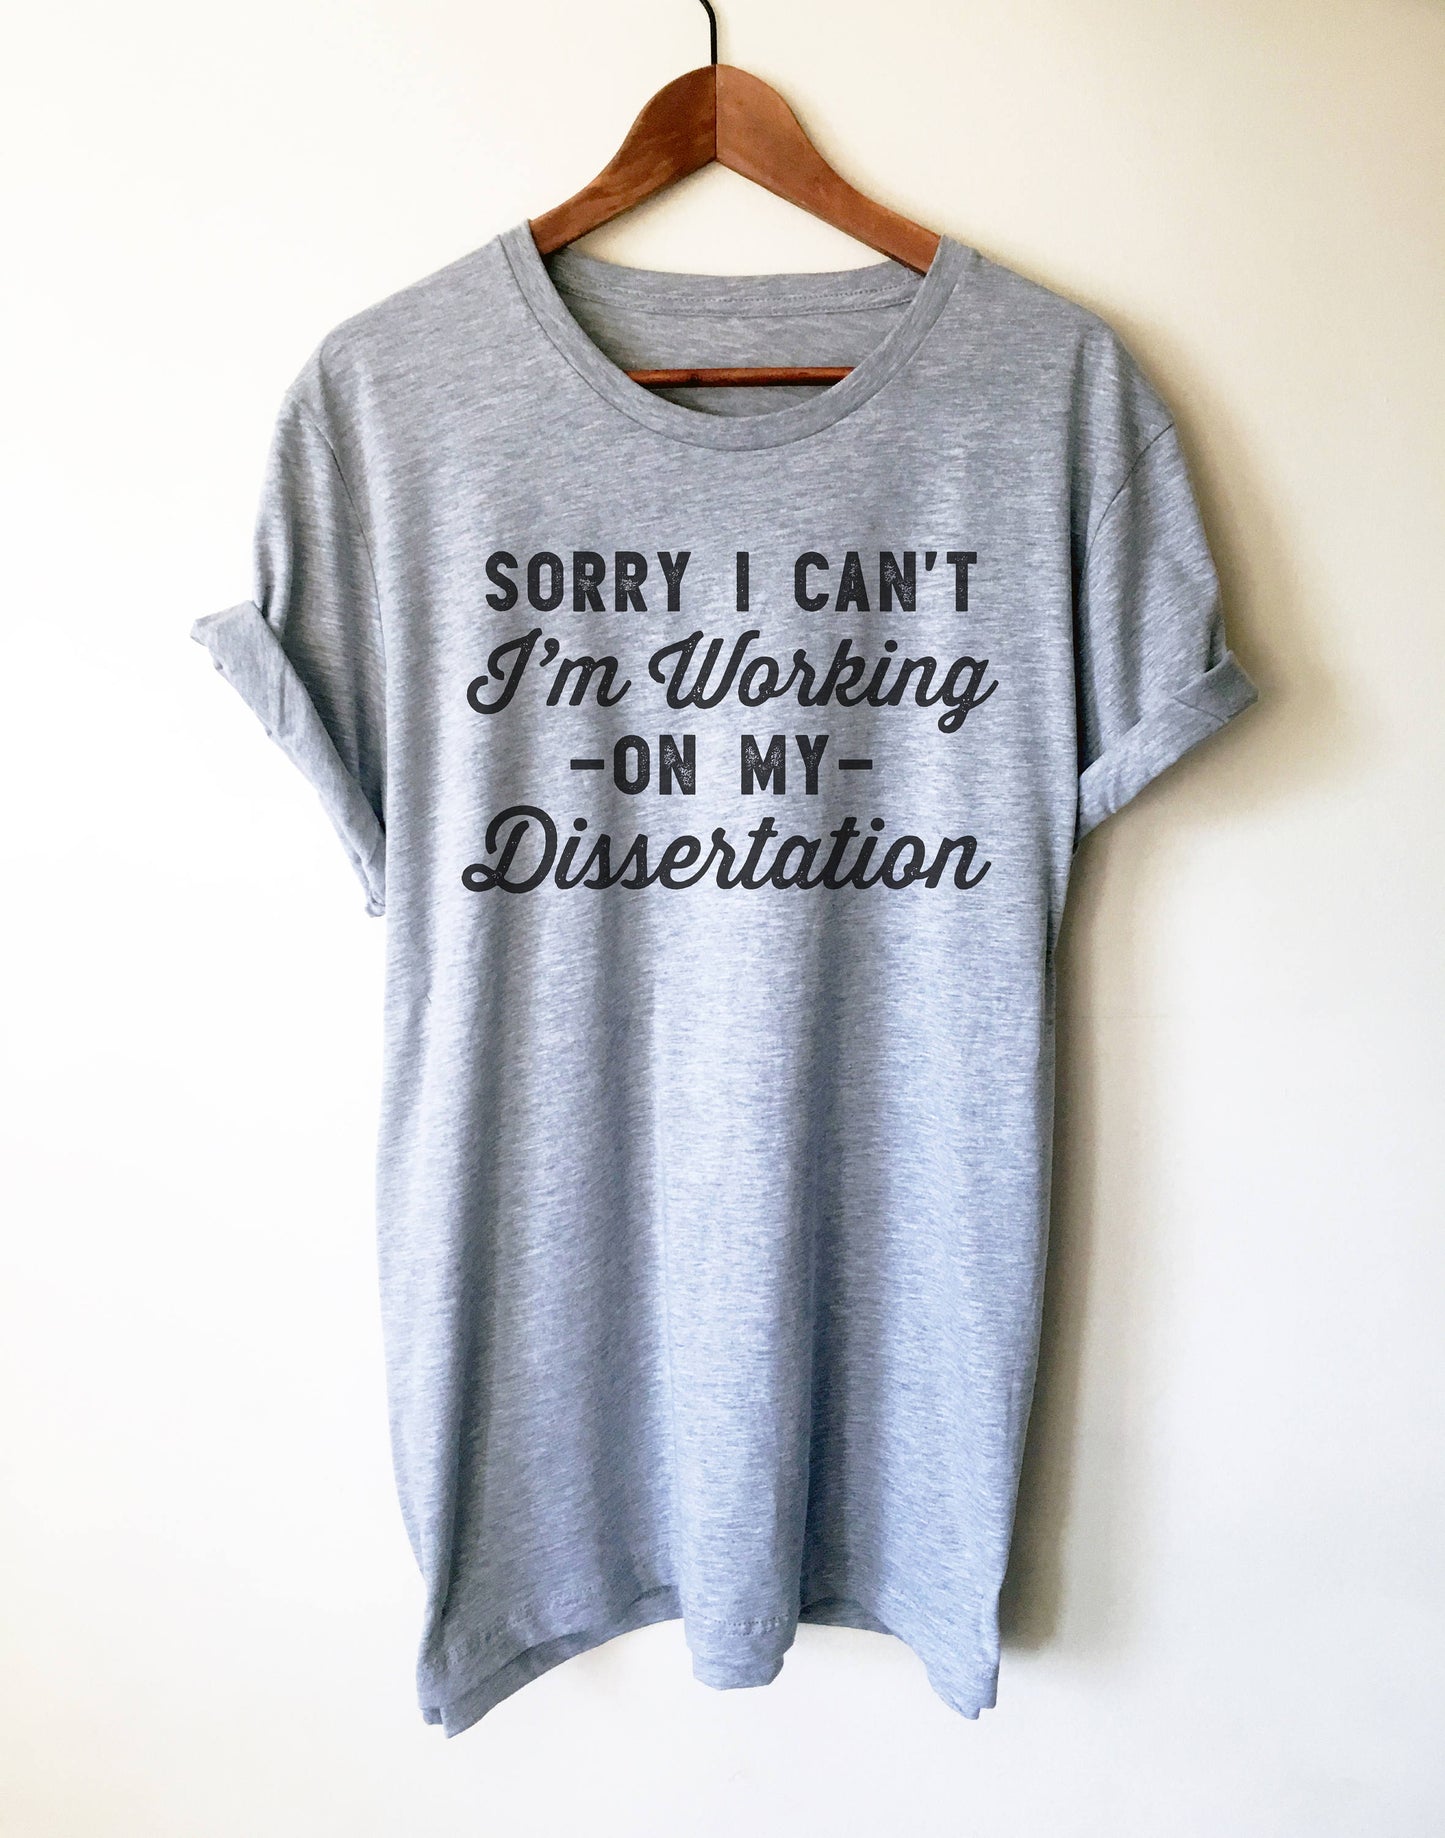 Sorry I Can't I'm Working On My Dissertation Unisex Shirt - Phd Gift, Doctorate Degree, Doctor Shirts, Phd Student, College Student